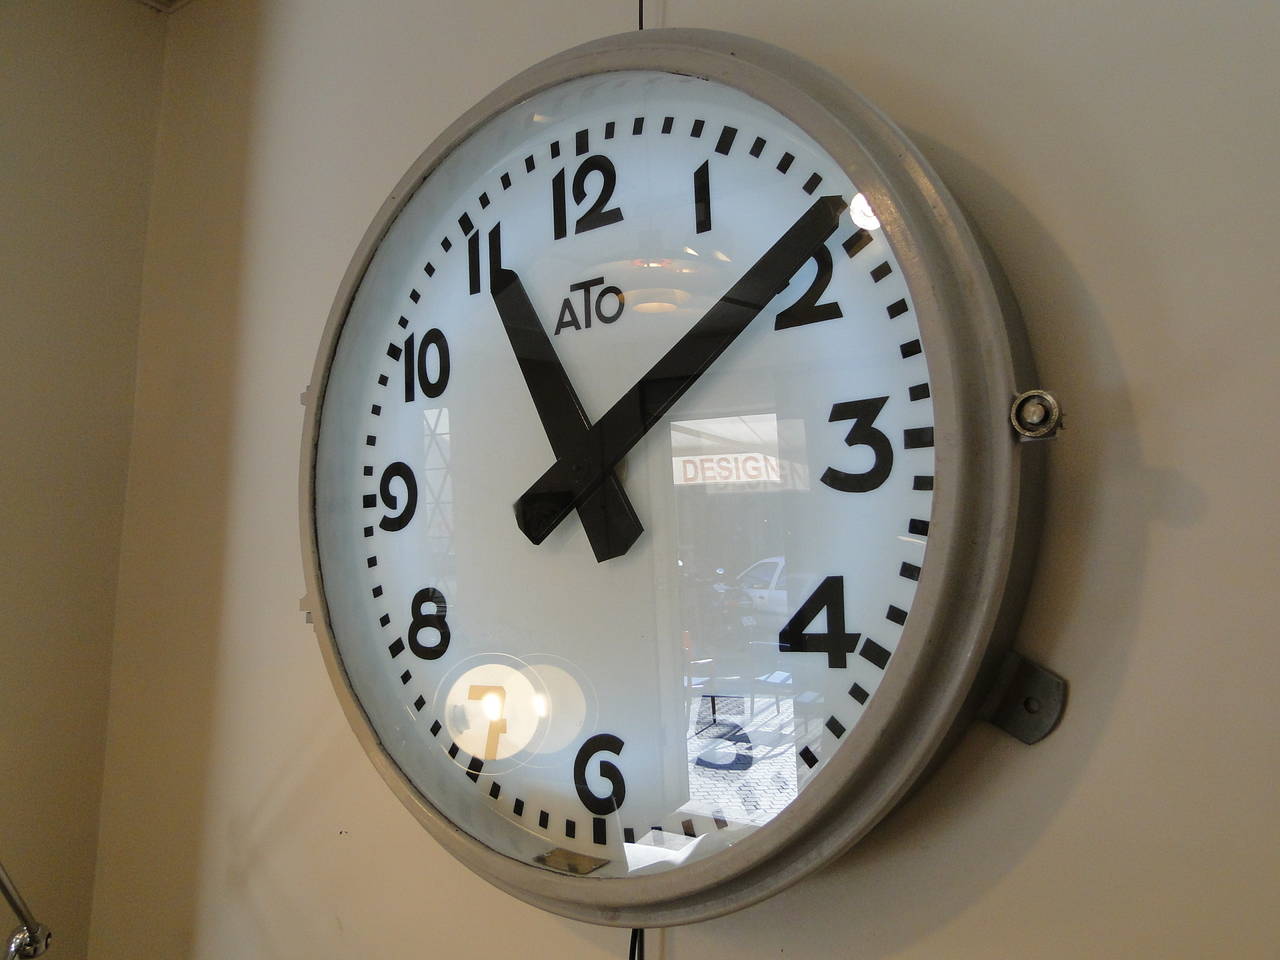 Aluminum French Factory Ato Station Railway Clock, Industrial